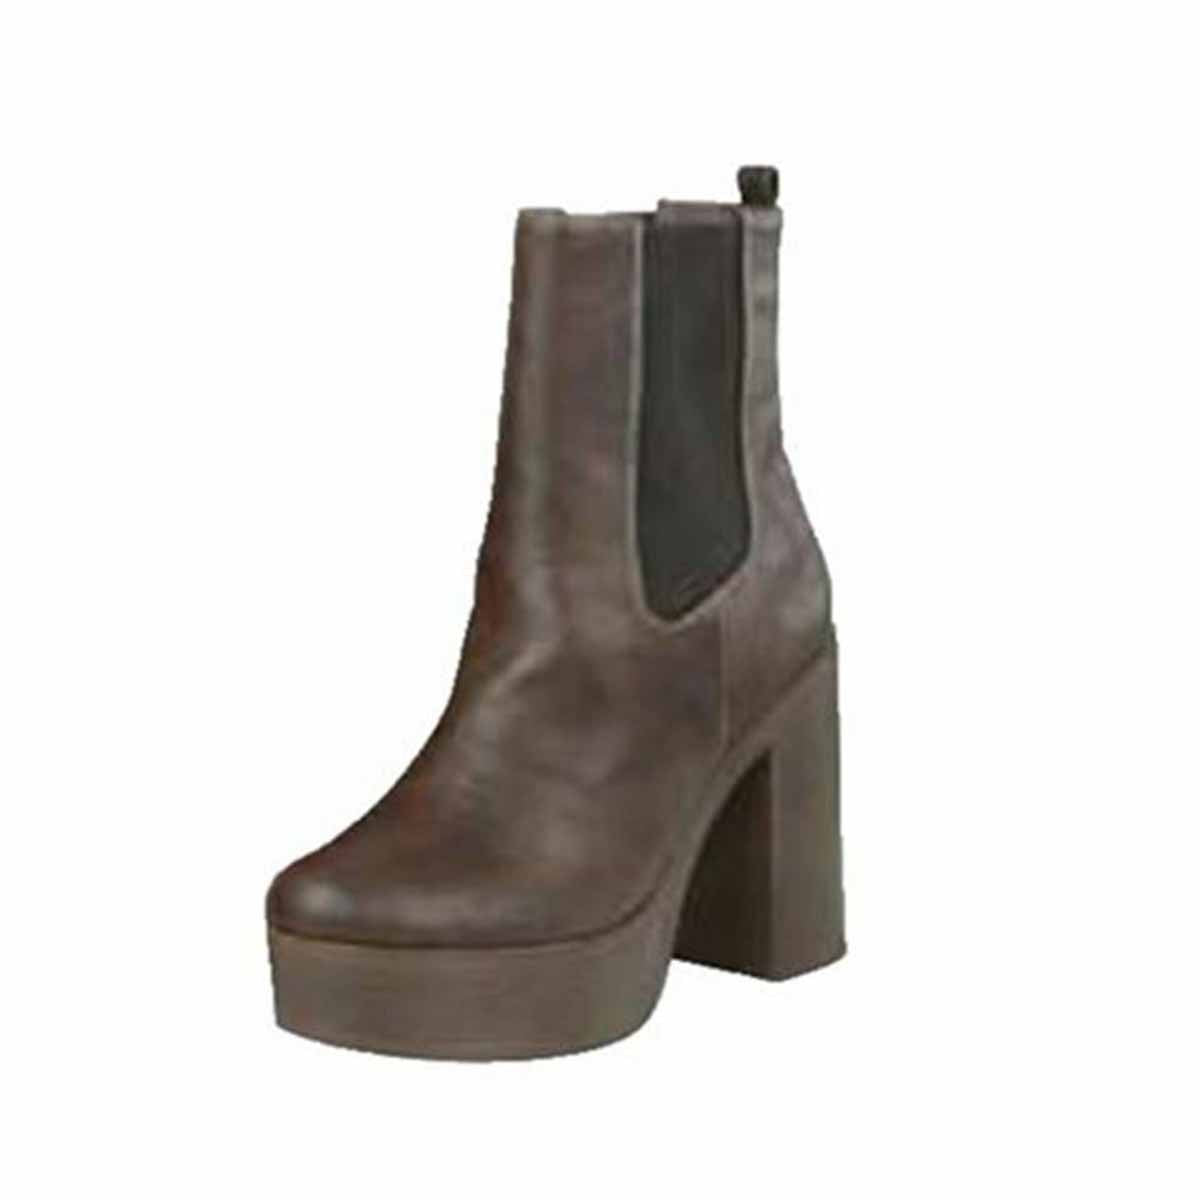 Dark brown Faux leather cleated sole block heel ankle boots